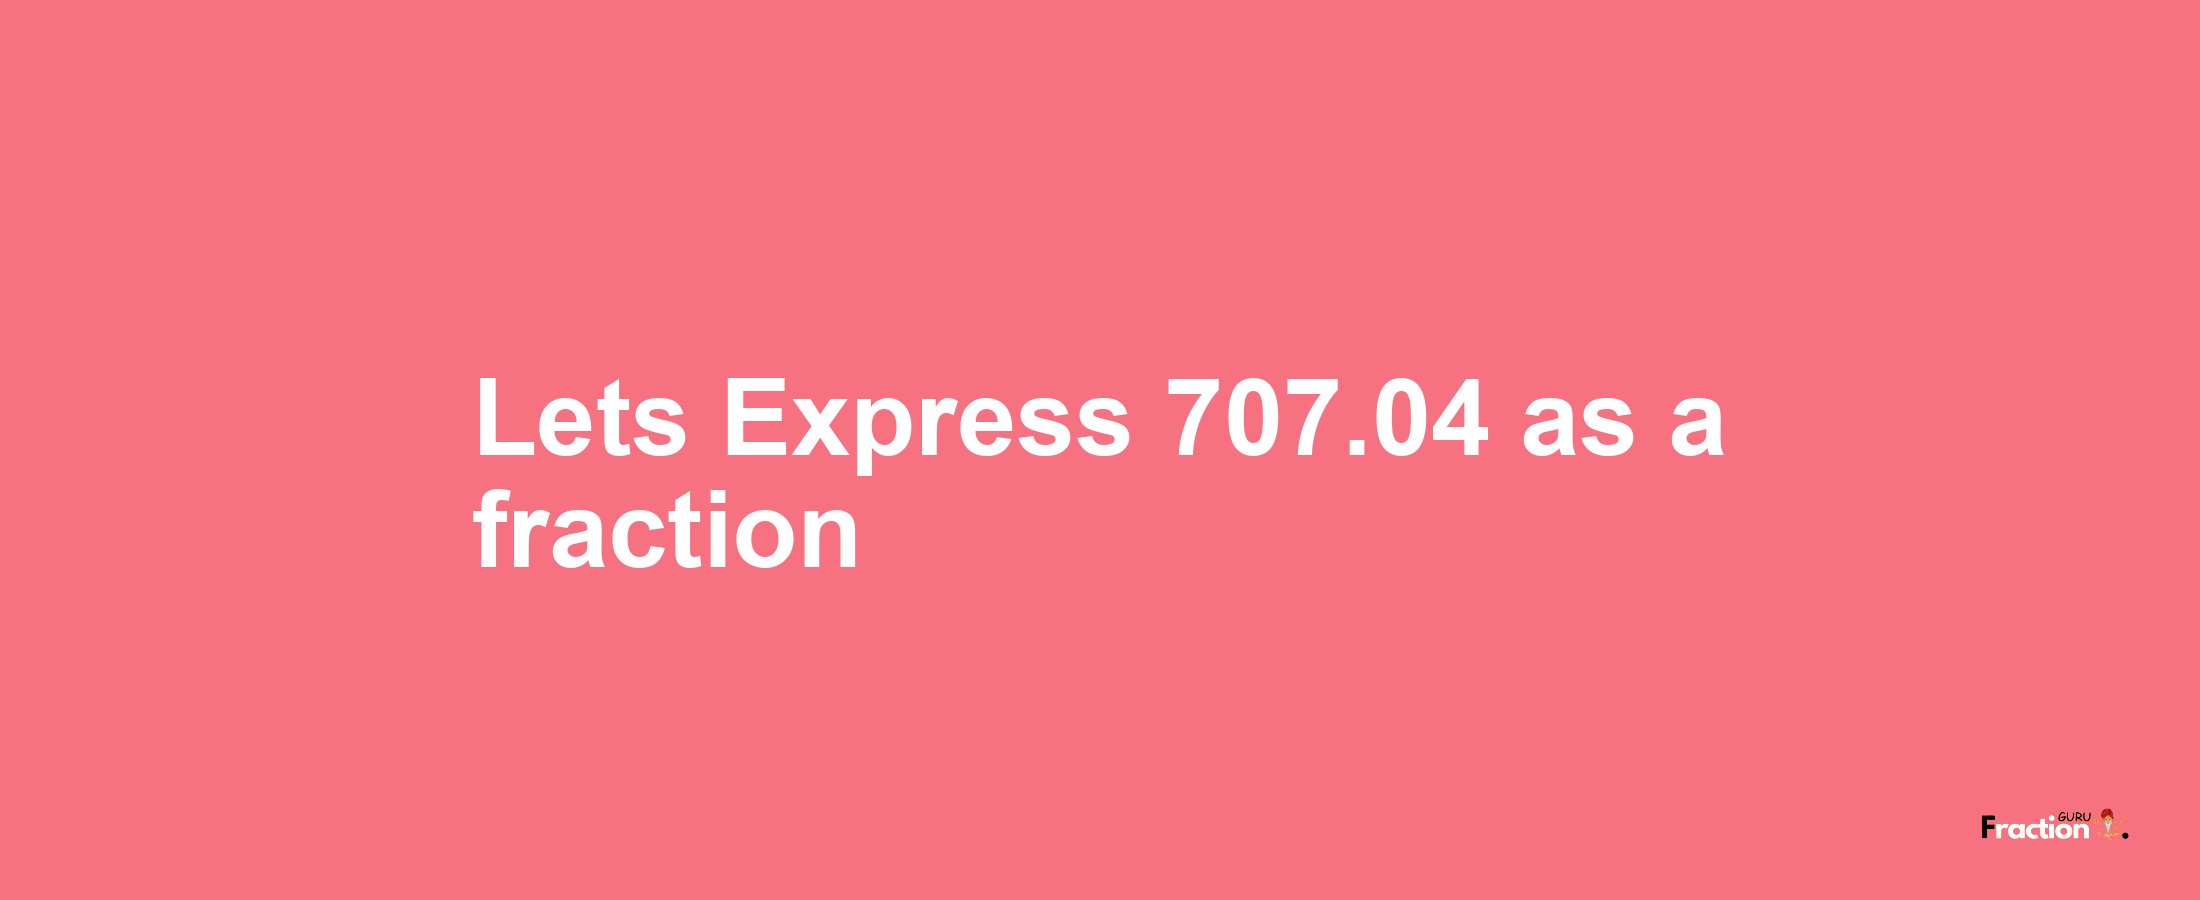 Lets Express 707.04 as afraction